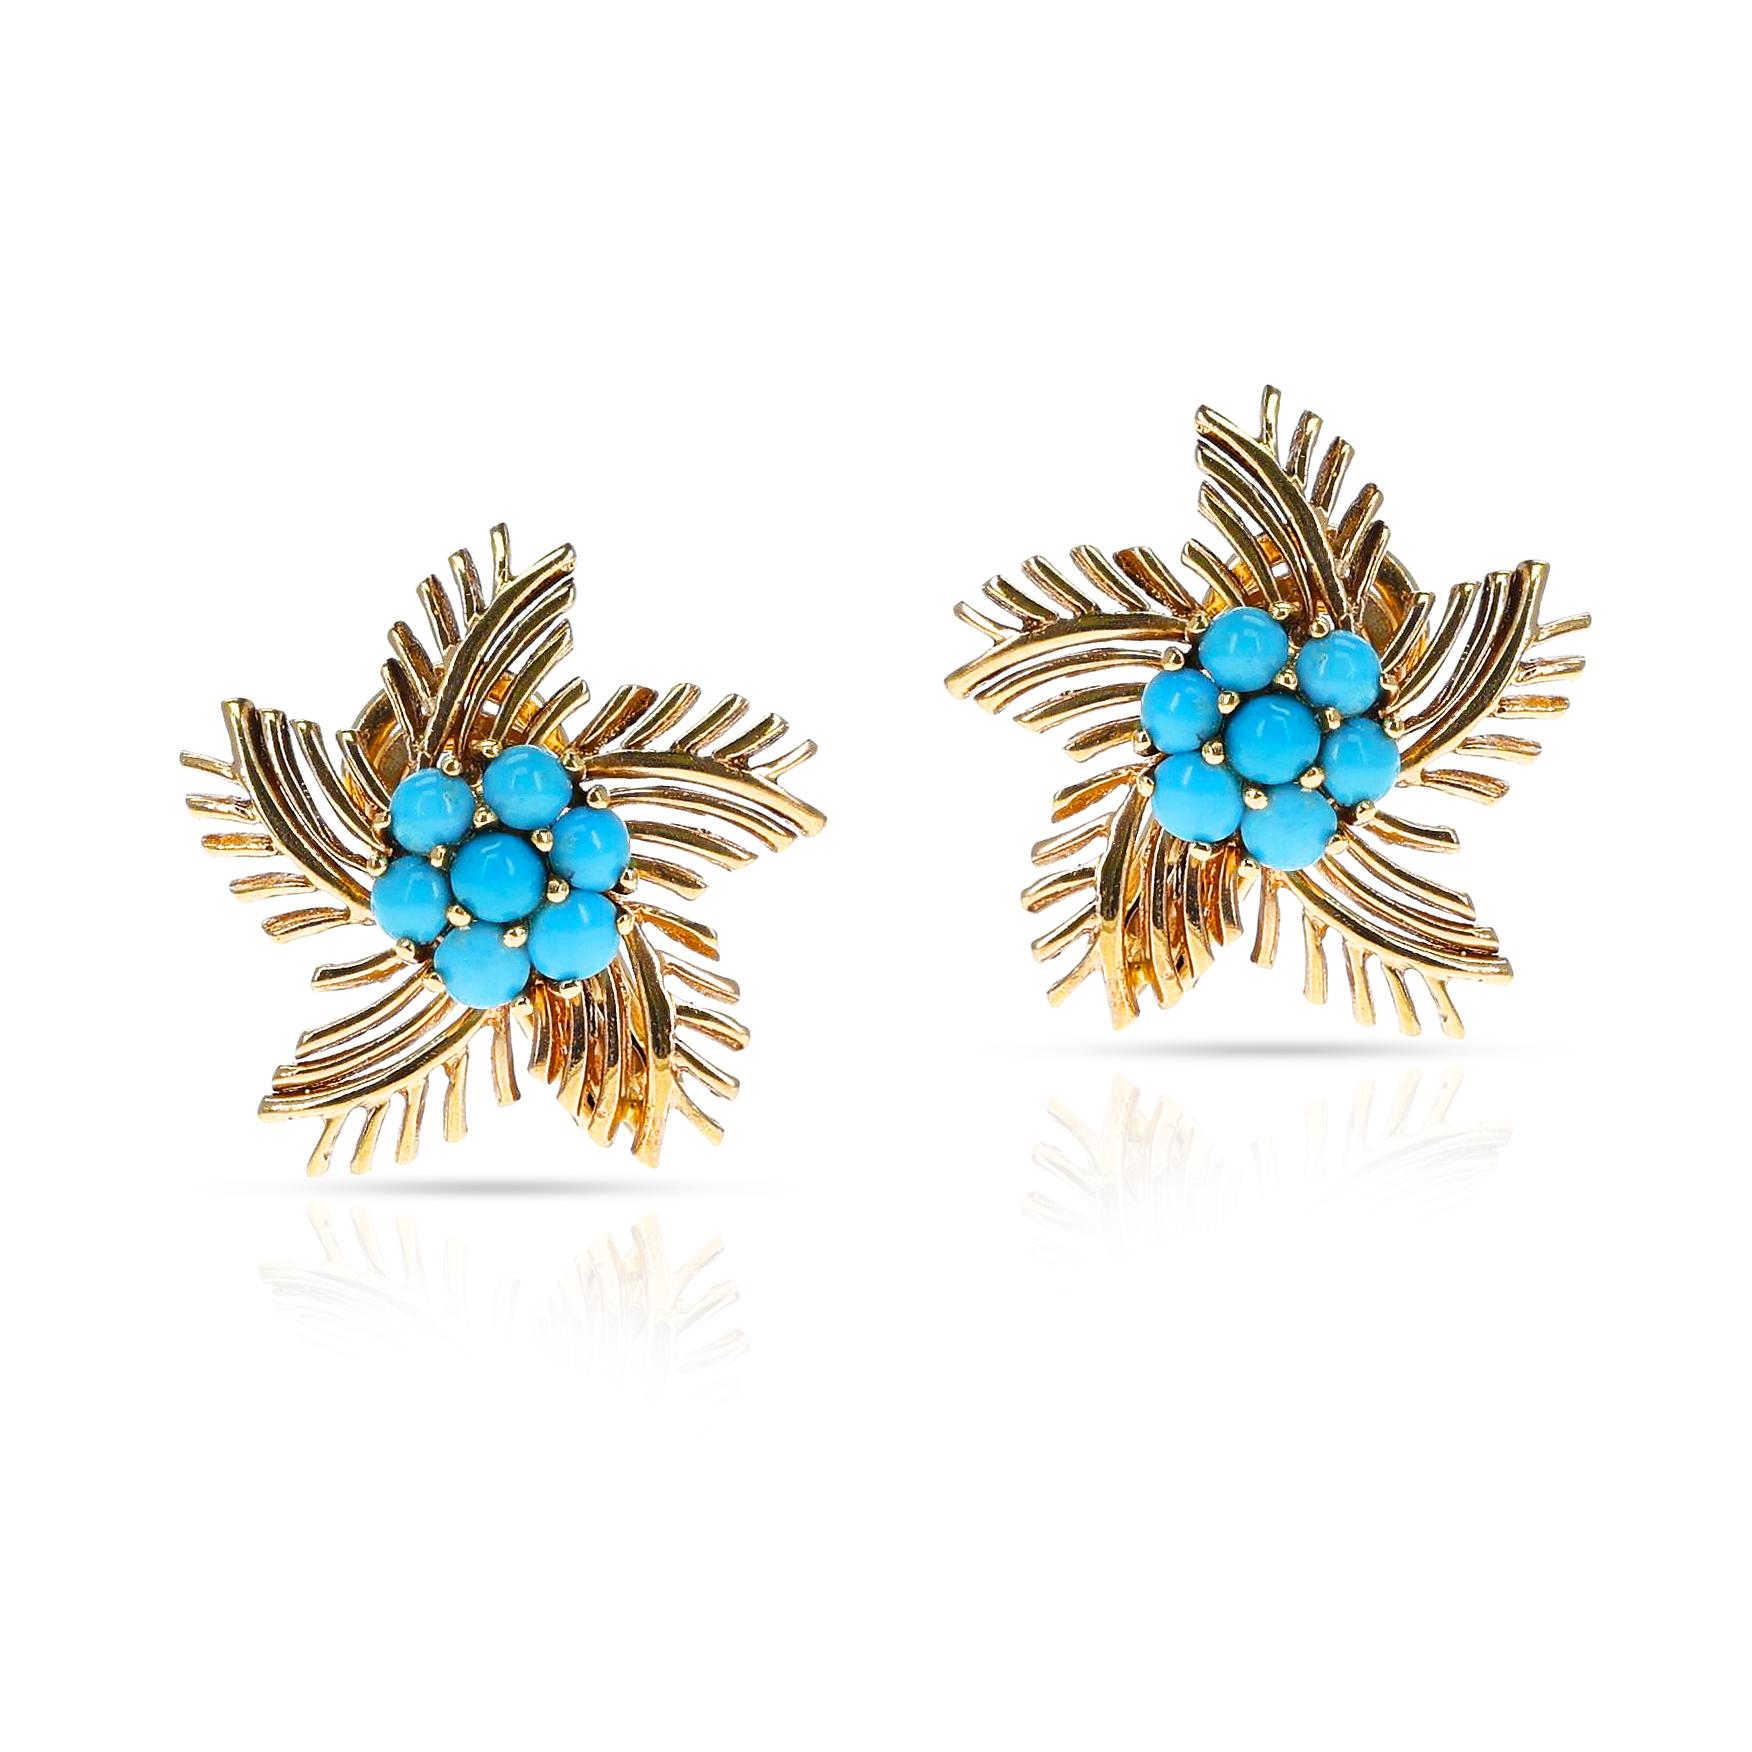 A pair of Turquoise Cabochon Star Earrings made in 14k yellow gold. The earrings are 0.90 inches and weigh a total of 12.18 grams. 

Matching Brooch available. 



SKU 1144-RTIEJM/WQADJA